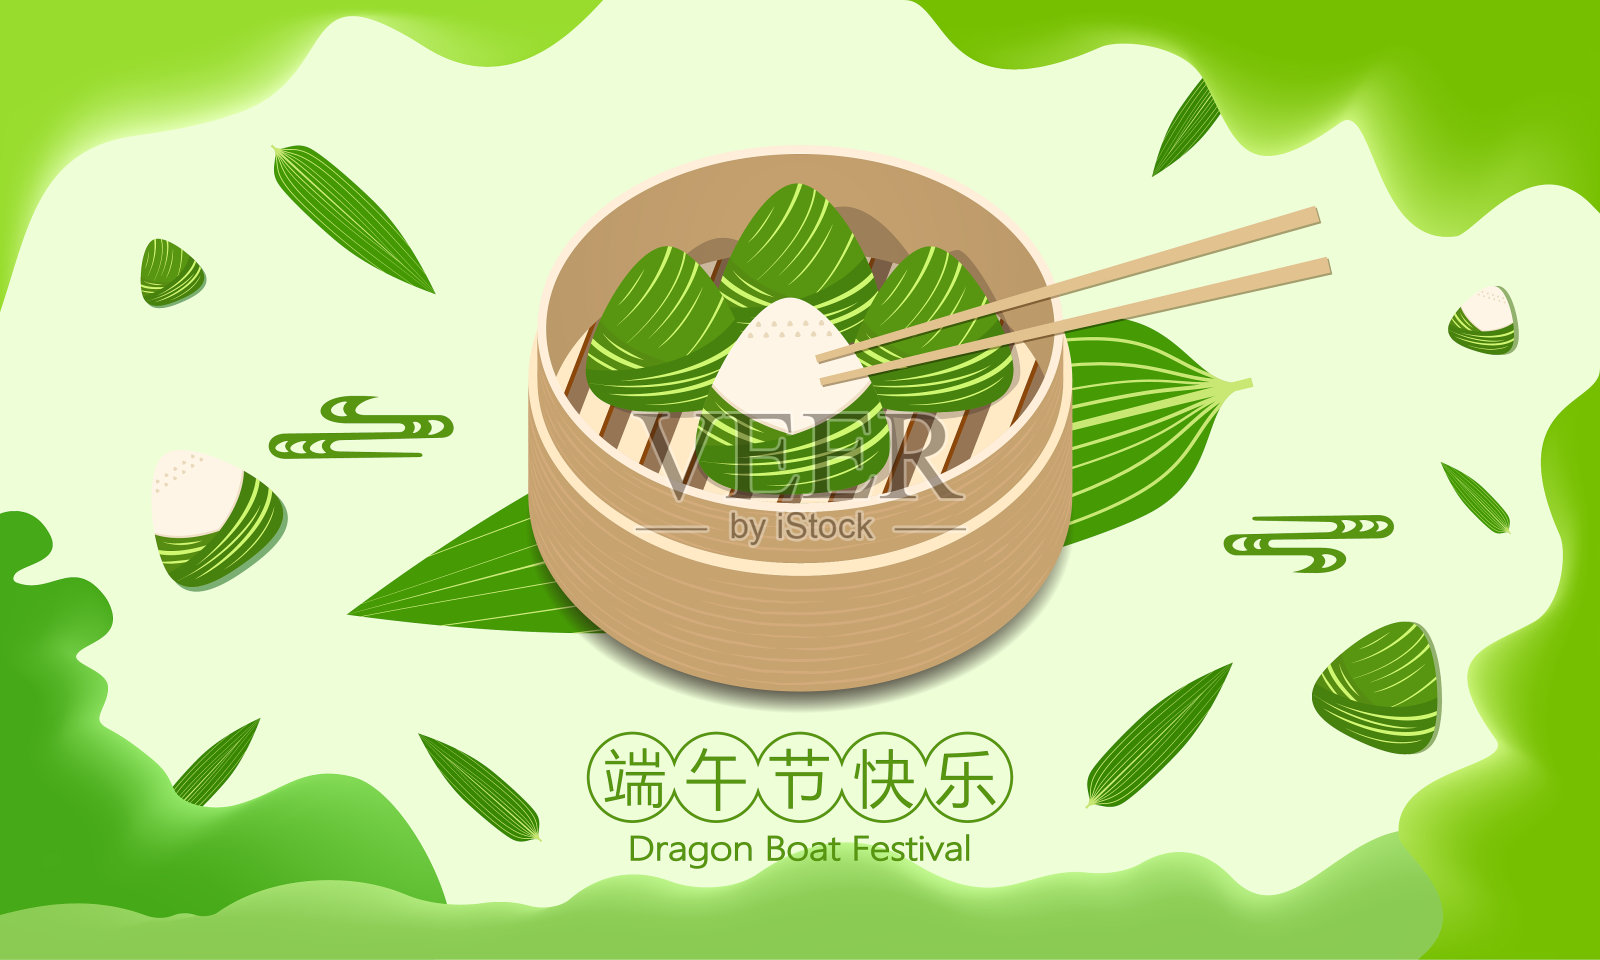 Dragon Boat Festival vector flat style illustration, Chinese traditional festival - Dragon Boat Festival设计模板素材